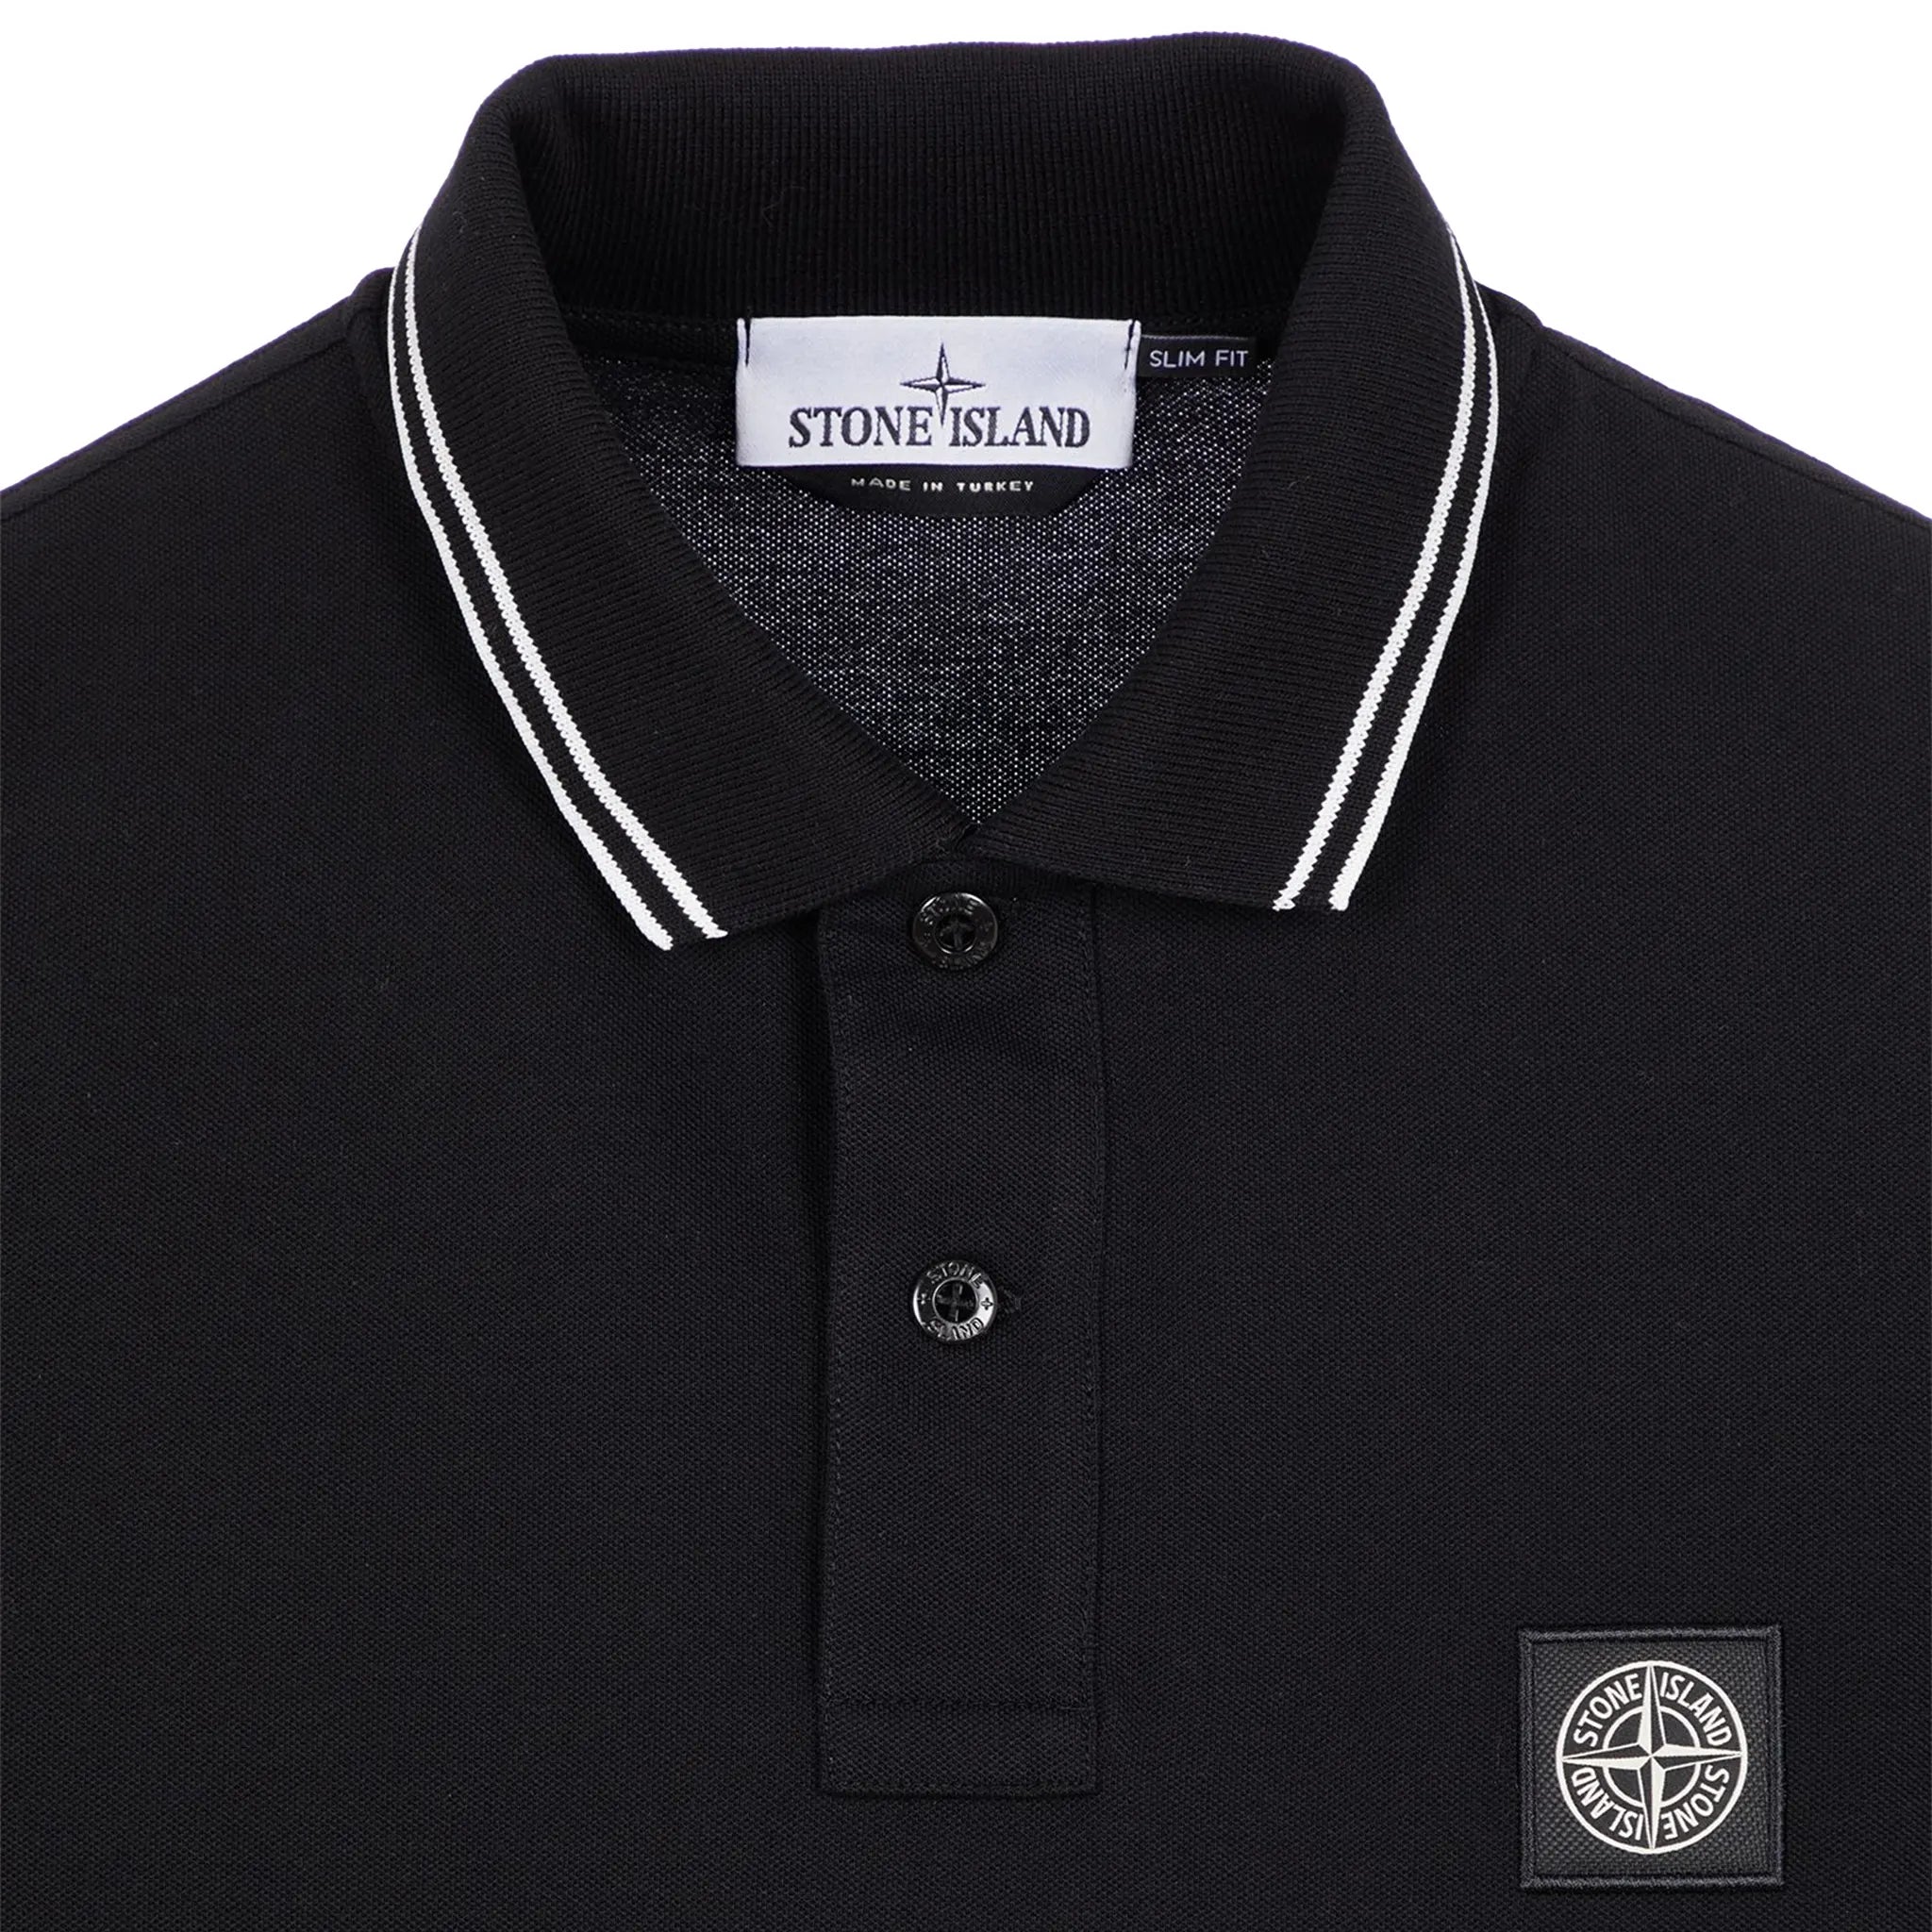 Front Detail view of Stone Island Tipped Badge Logo Black Polo Shirt 10152sc18-a0029